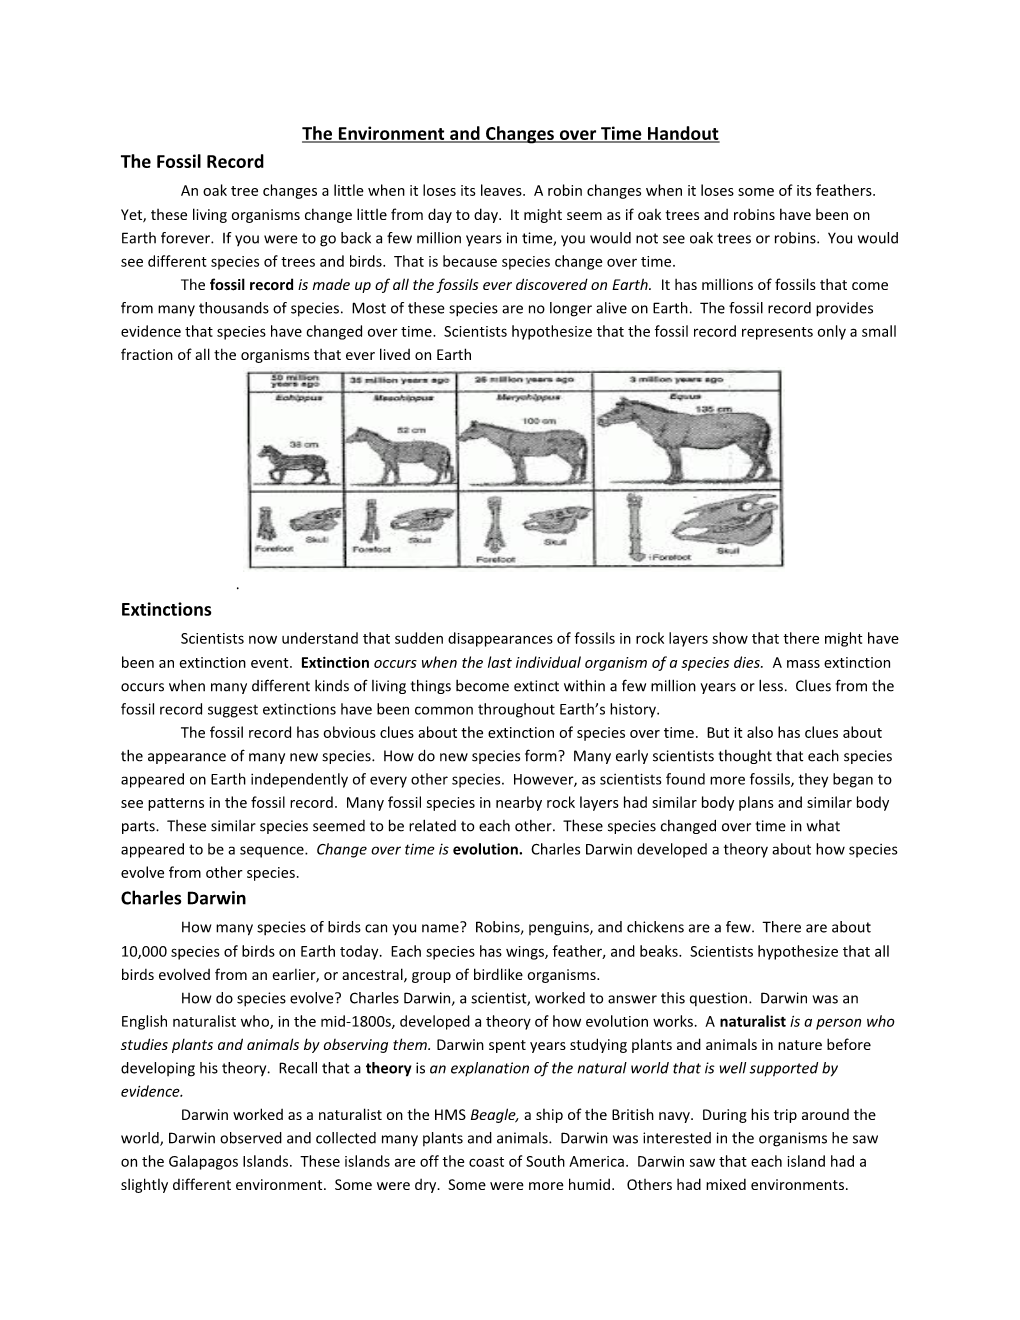 The Environment and Changes Over Time Handout